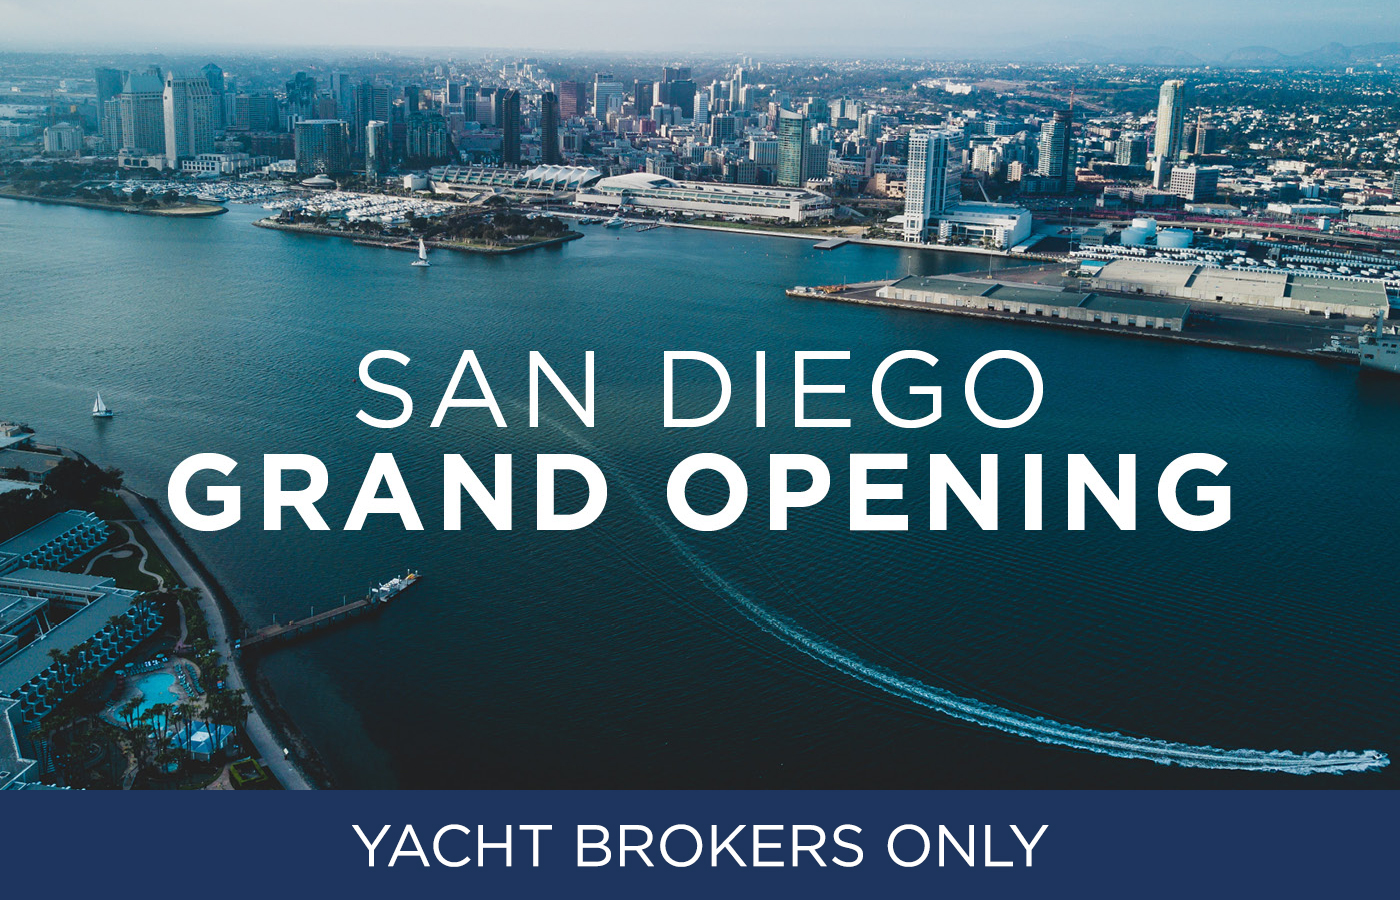 San Diego Open House: Yacht Brokers Only